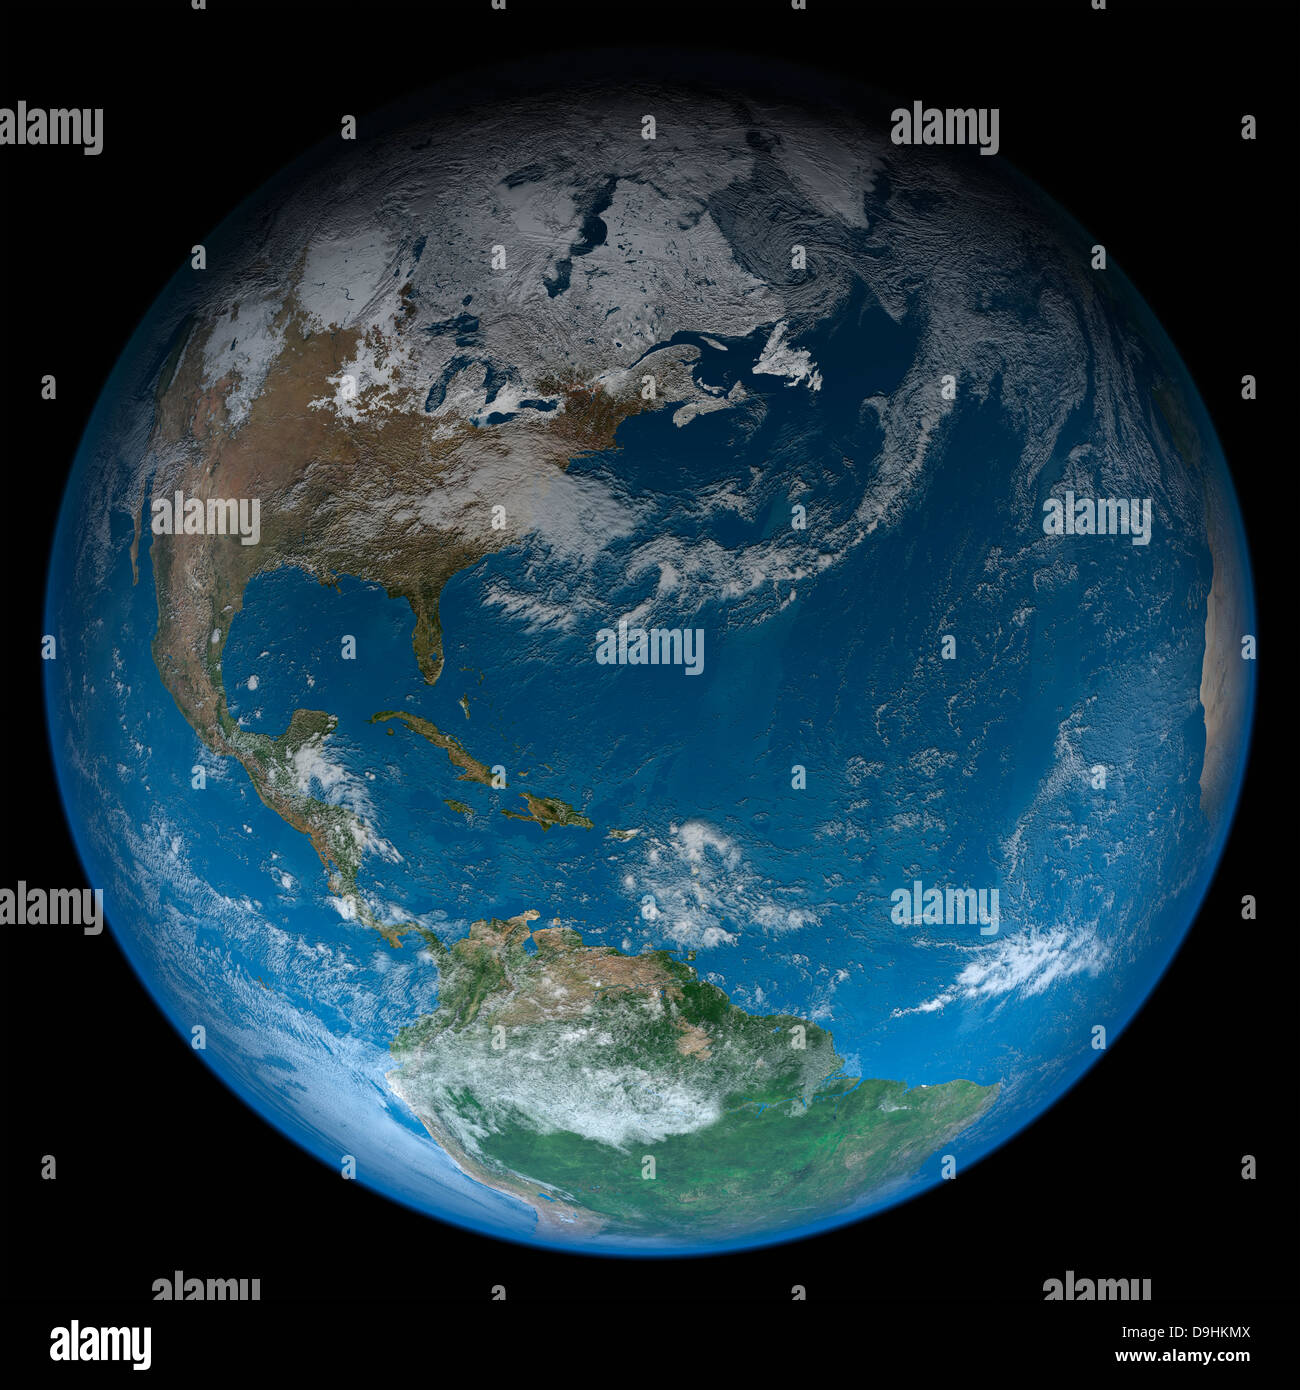 Full Earth featuring North and South America. Stock Photo